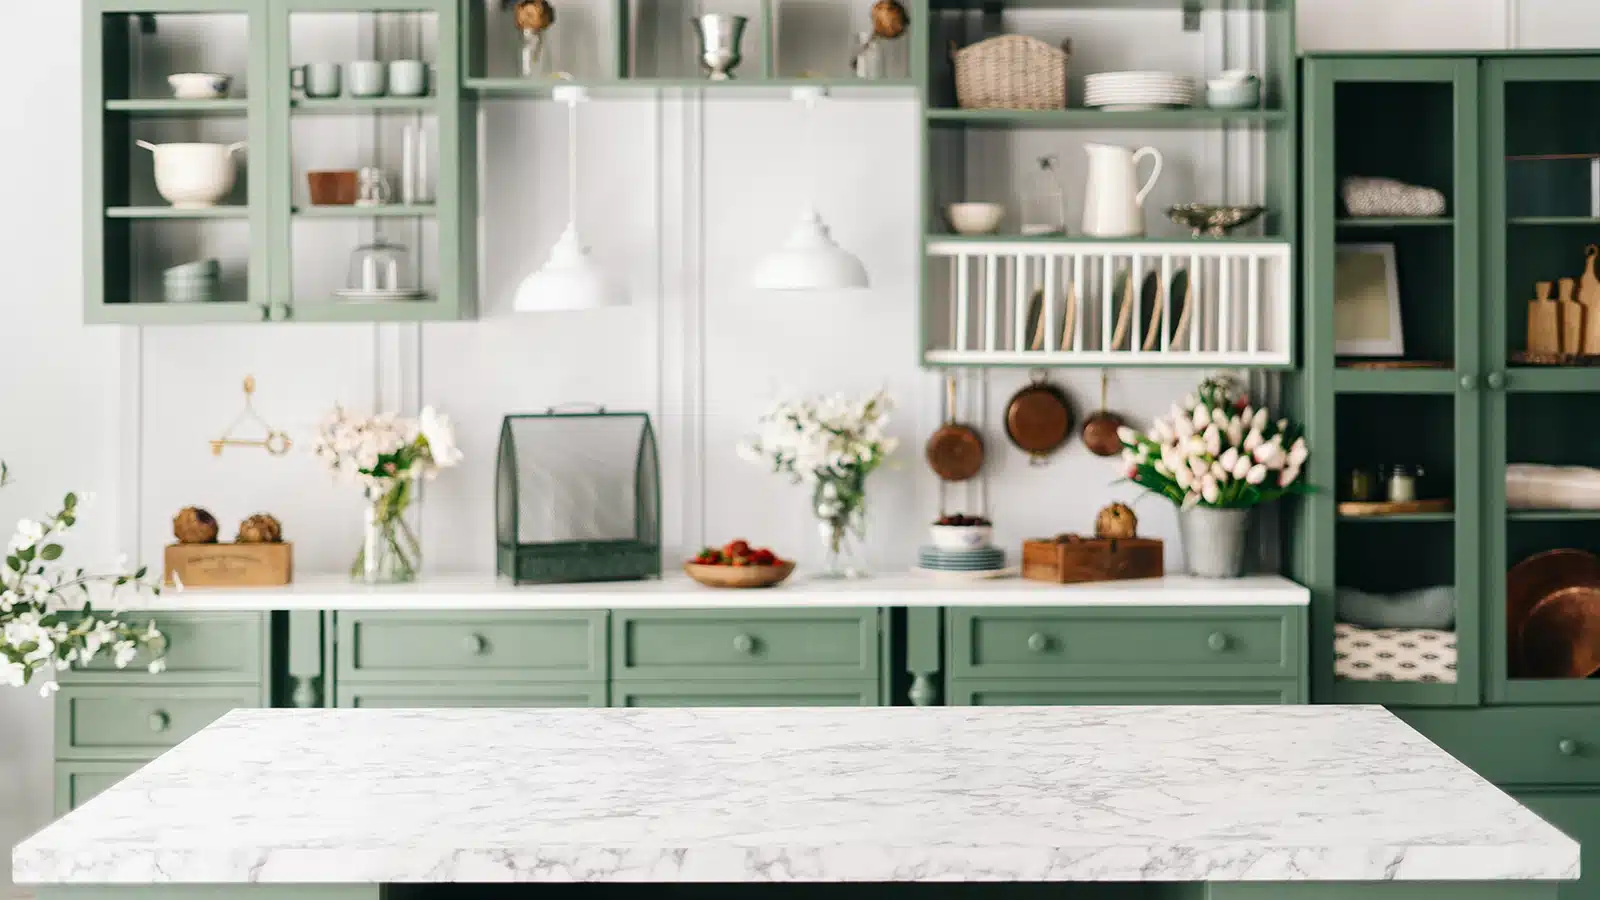 A kitchen with a vintage charm featuring sage green cabinetry, marble countertop, and open shelving filled with kitchenware.